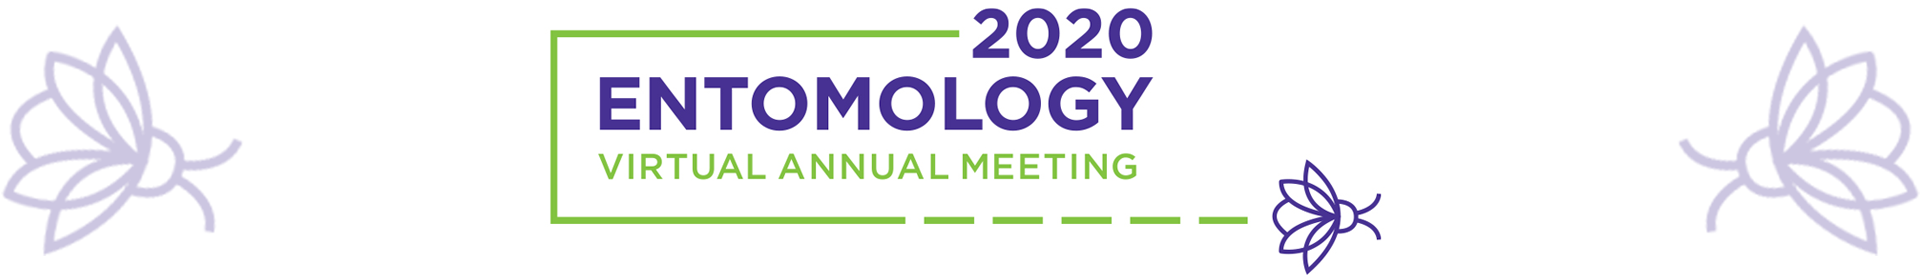 Entomology 2020 - Paper and Poster Submissions Event Banner